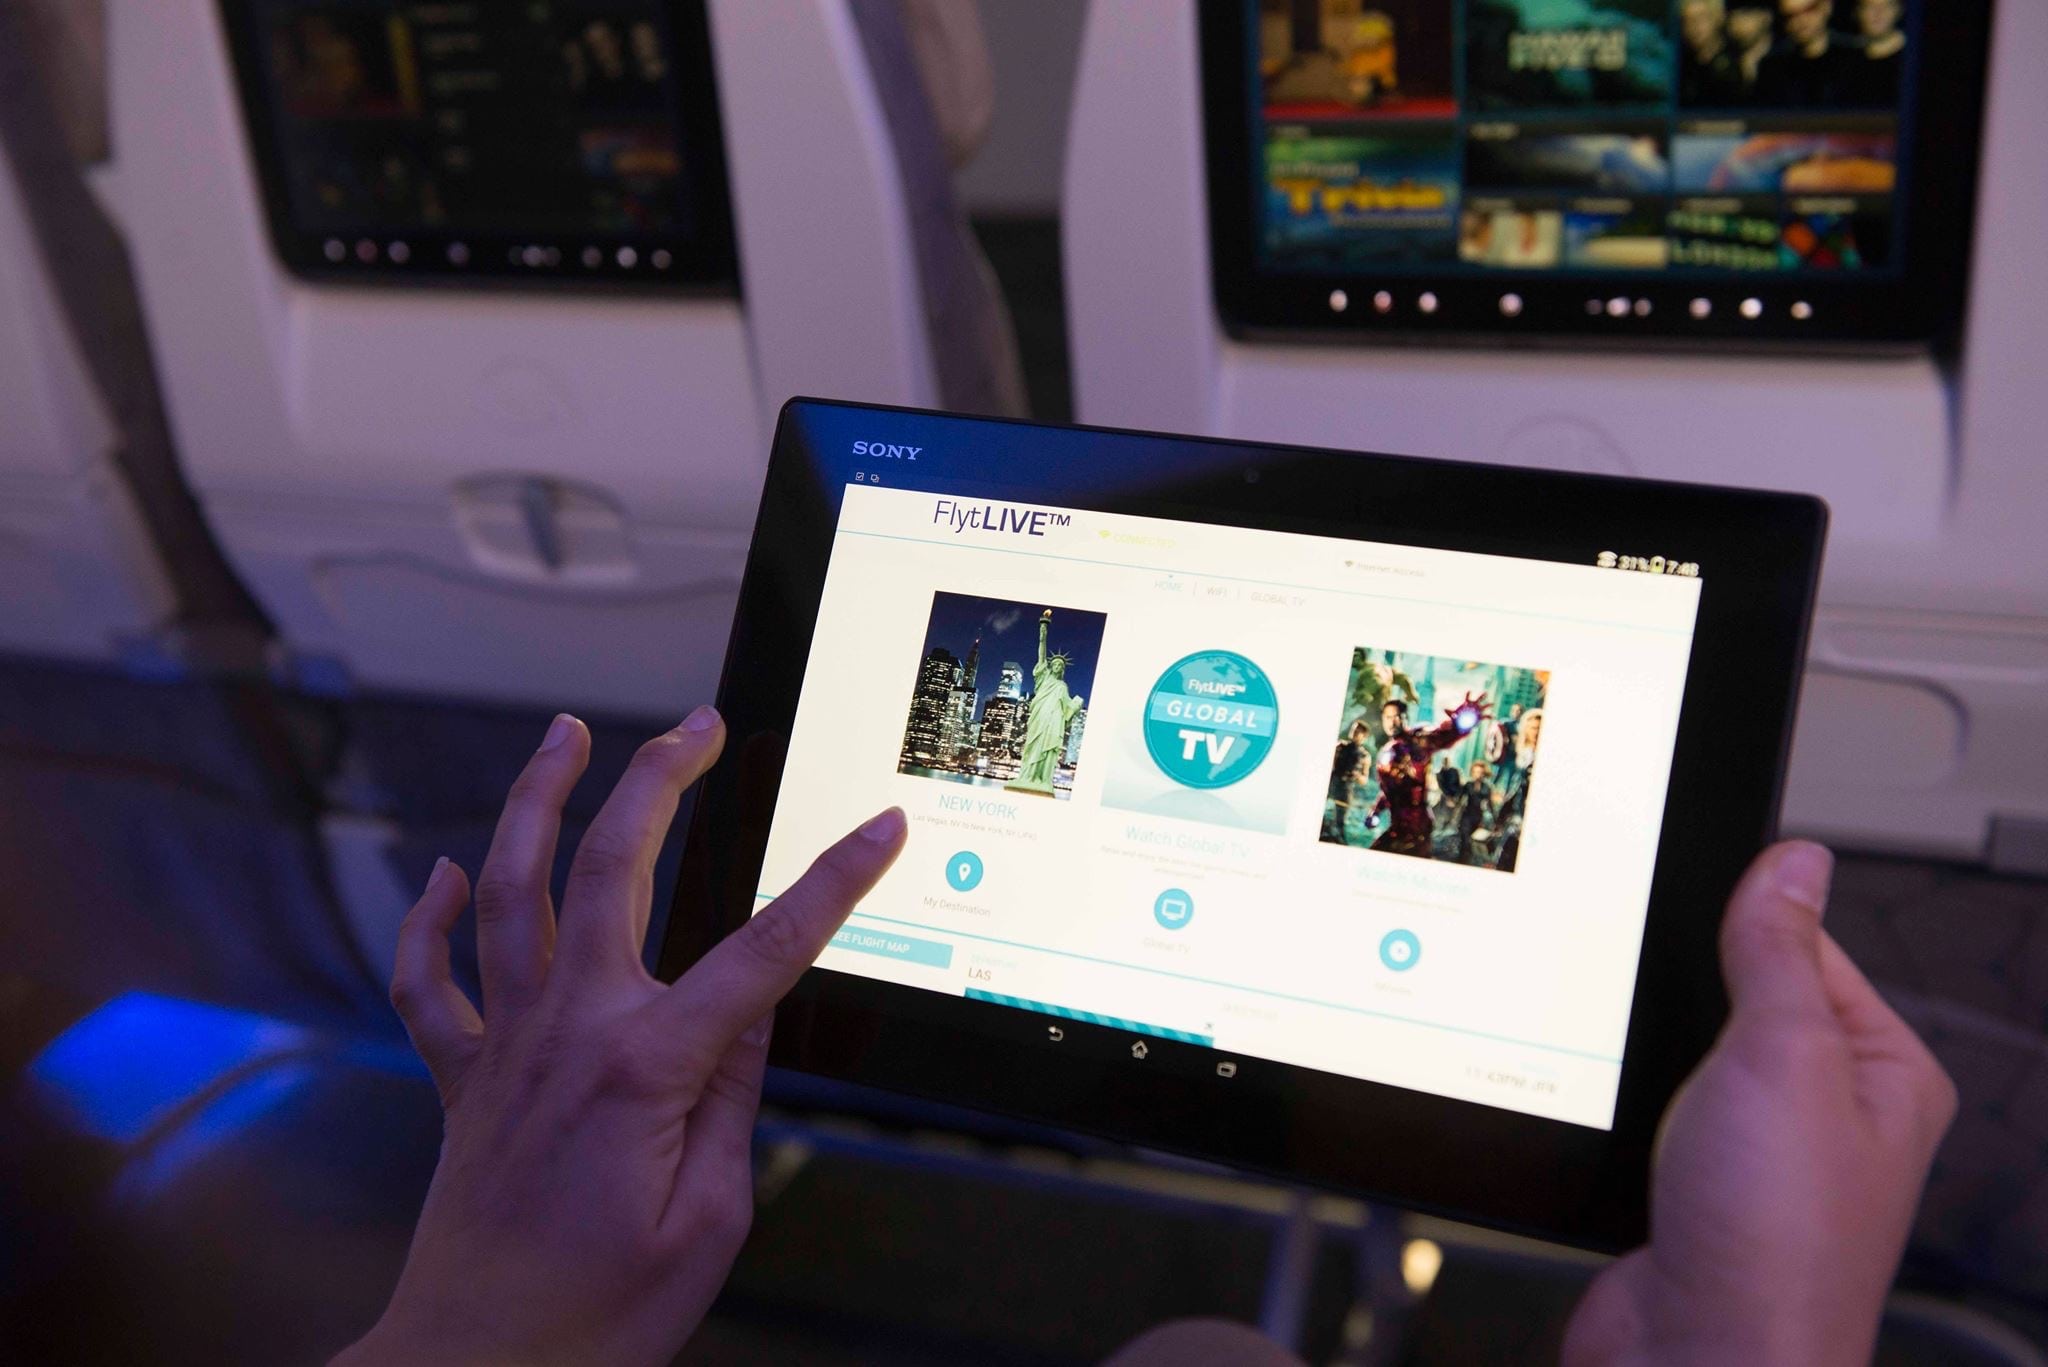 French firm Thales will offer an in-flight WiFi product for airlines in the Americas. It hopes to win U.S. customers. 